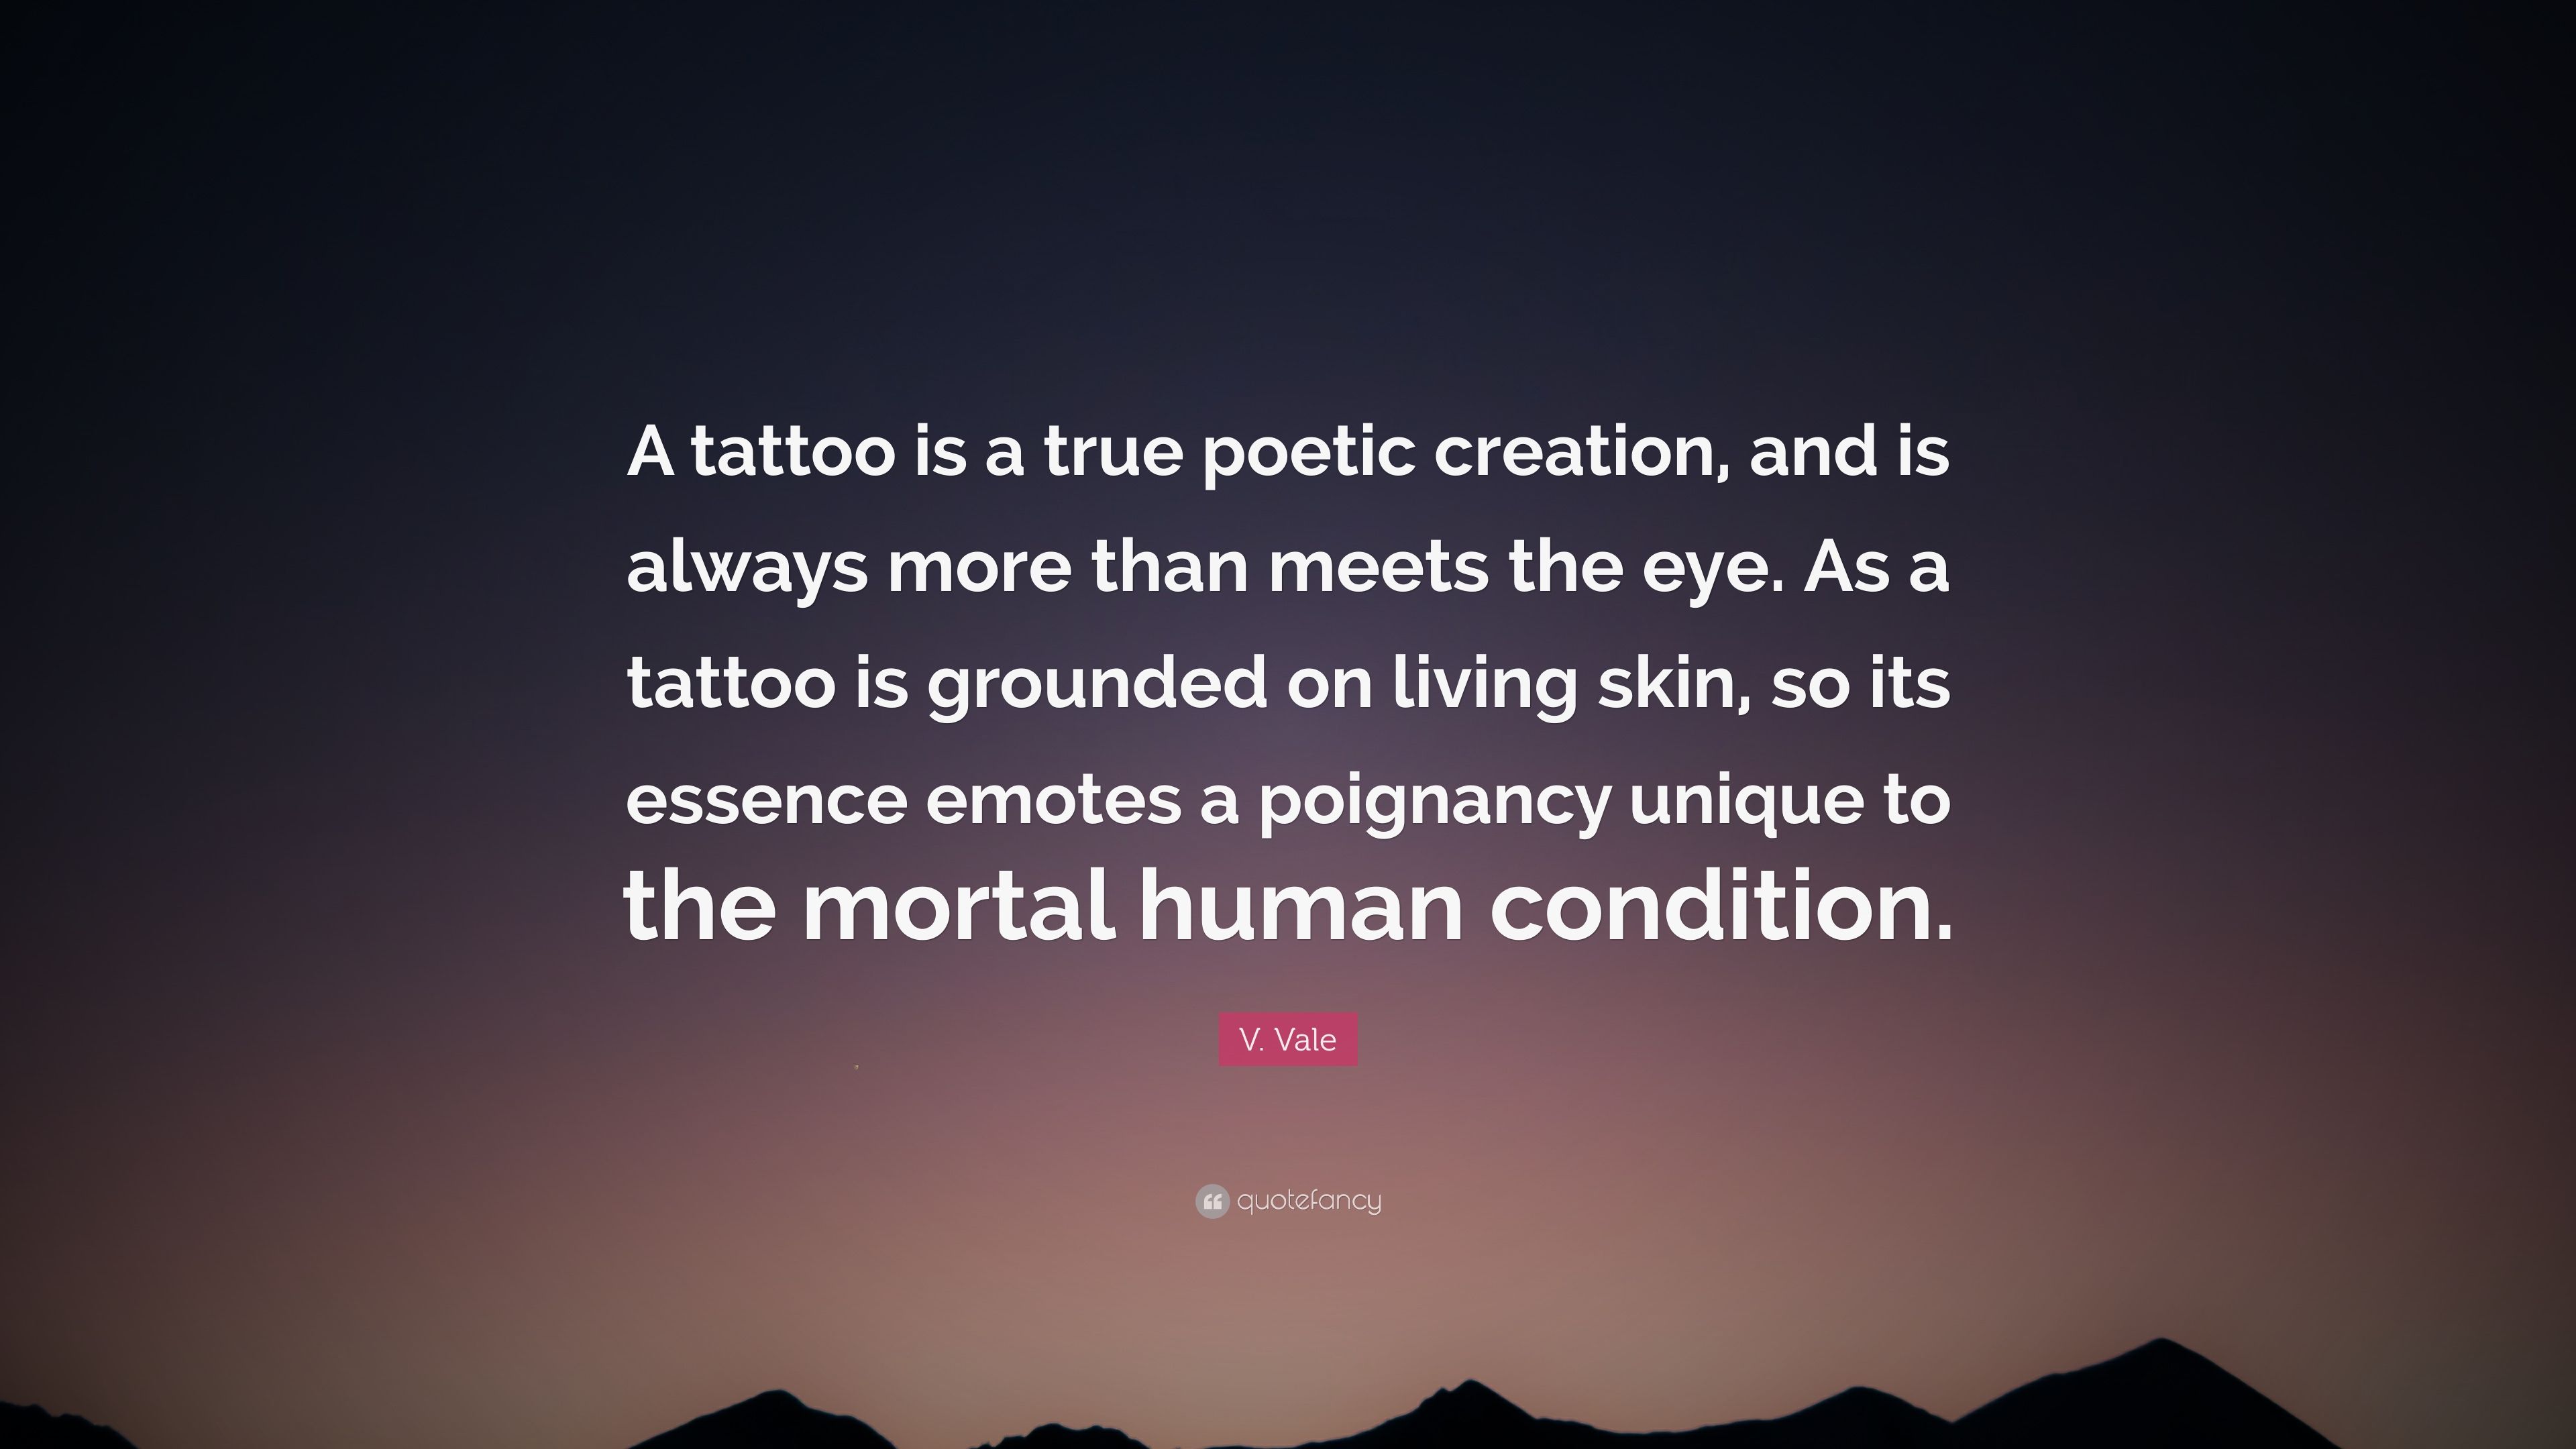 V. Vale Quote: “A tattoo is a true poetic creation, and is always more than meets the eye. As a tattoo is grounded on living skin, so it.” (7 wallpaper)